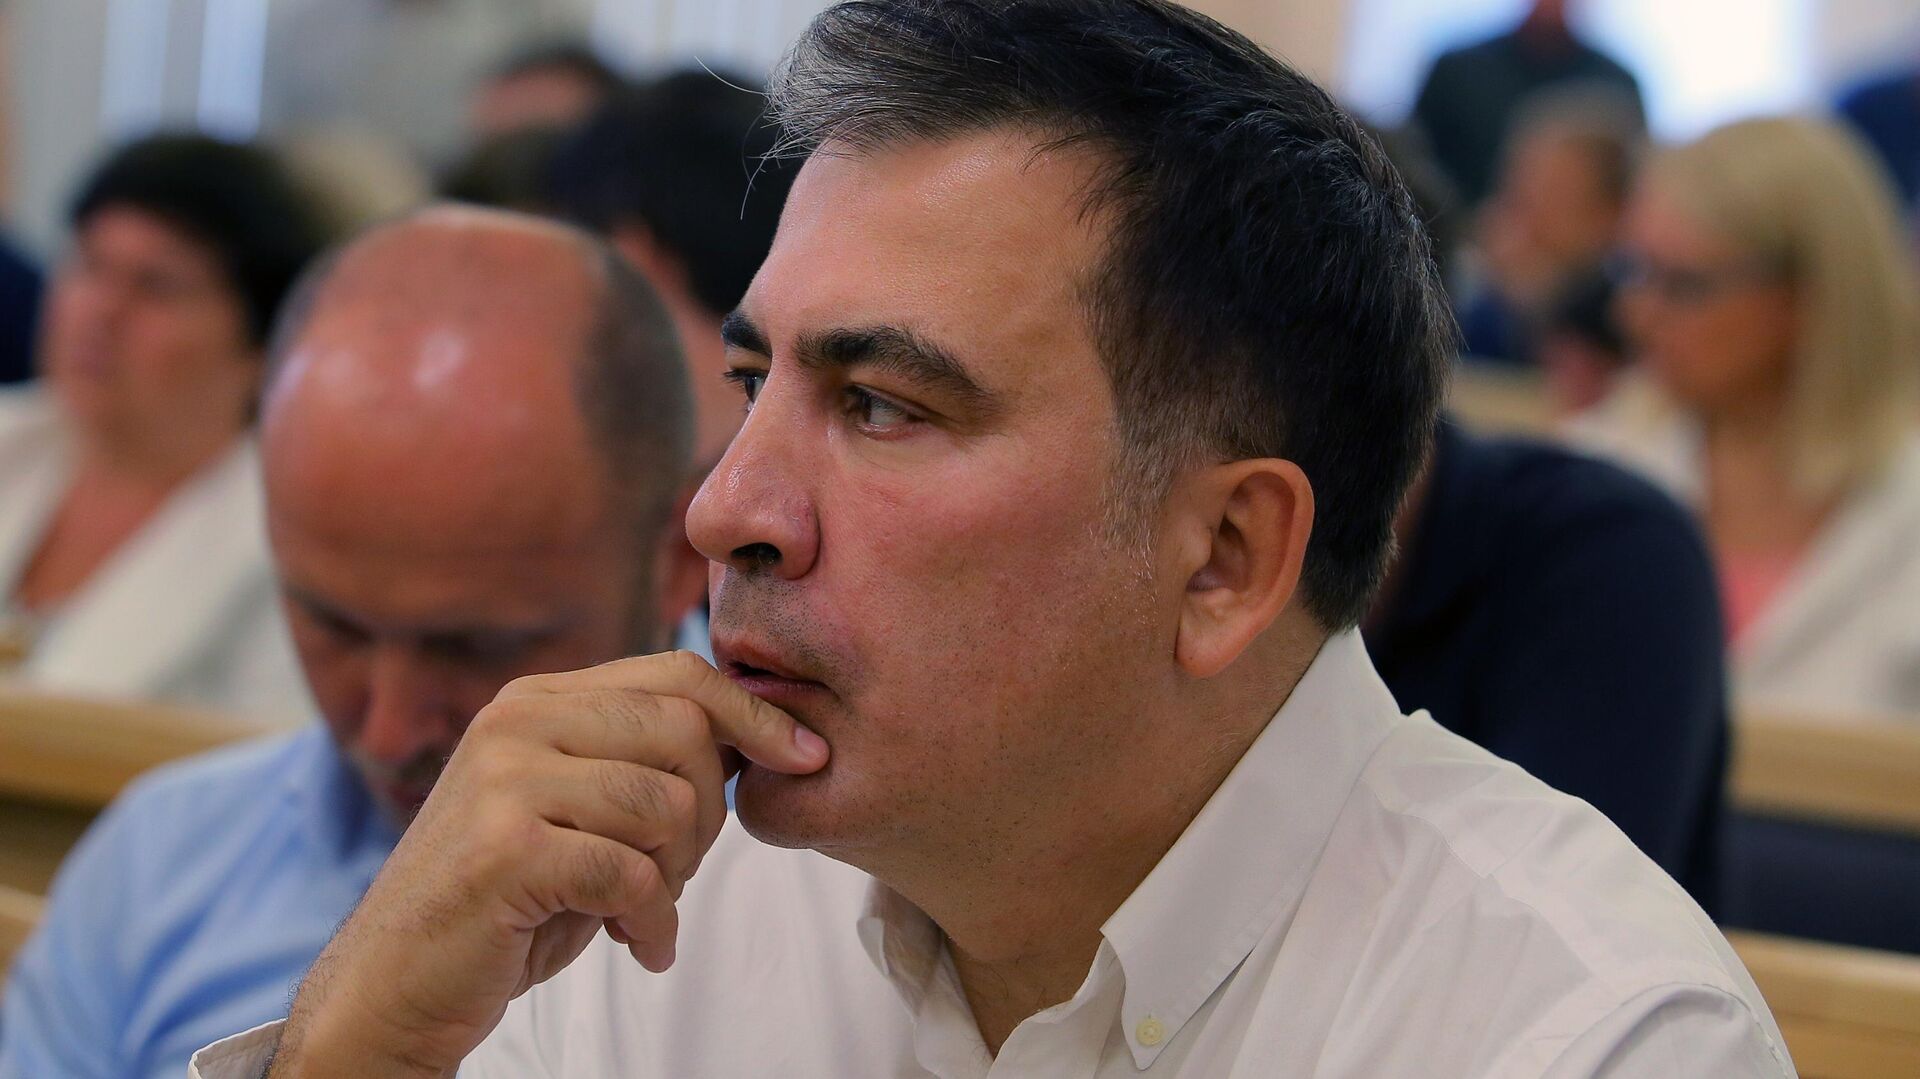 Leader of the New Forces Movement political party Mikhail Saakashvili at the session of the Supreme Administrative Court of Ukraine.  June 28, 2019 - 1920, 10/23/2021